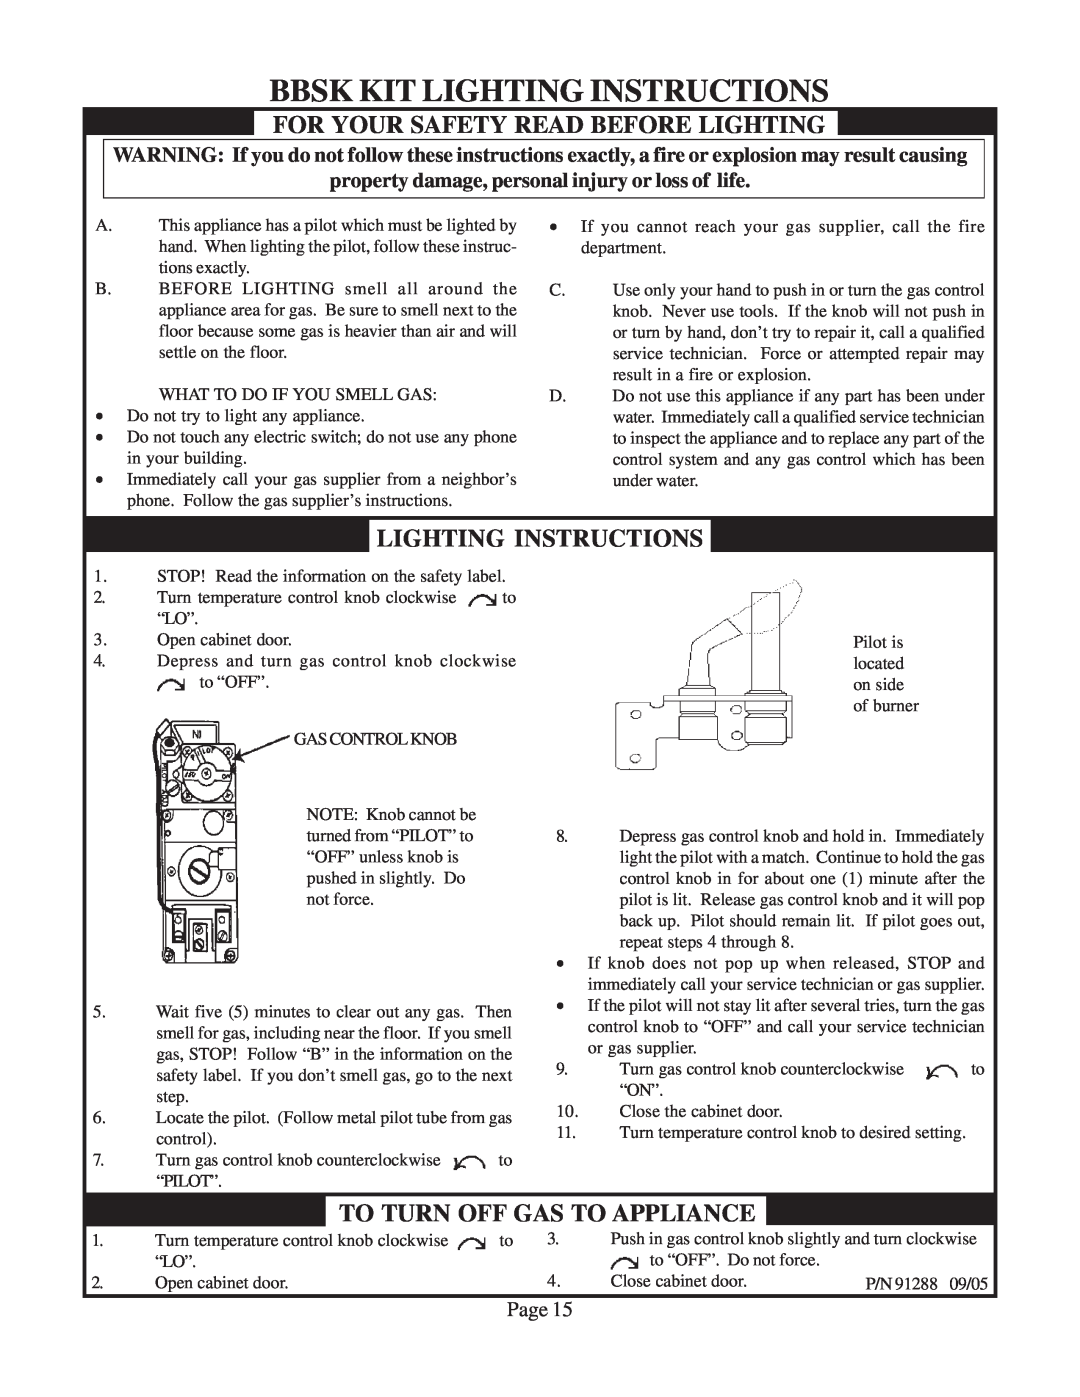 Louisville Tin and Stove W255F, W506F, W505F, W256F Bbsk Kit Lighting Instructions, For Your Safety Read Before Lighting 